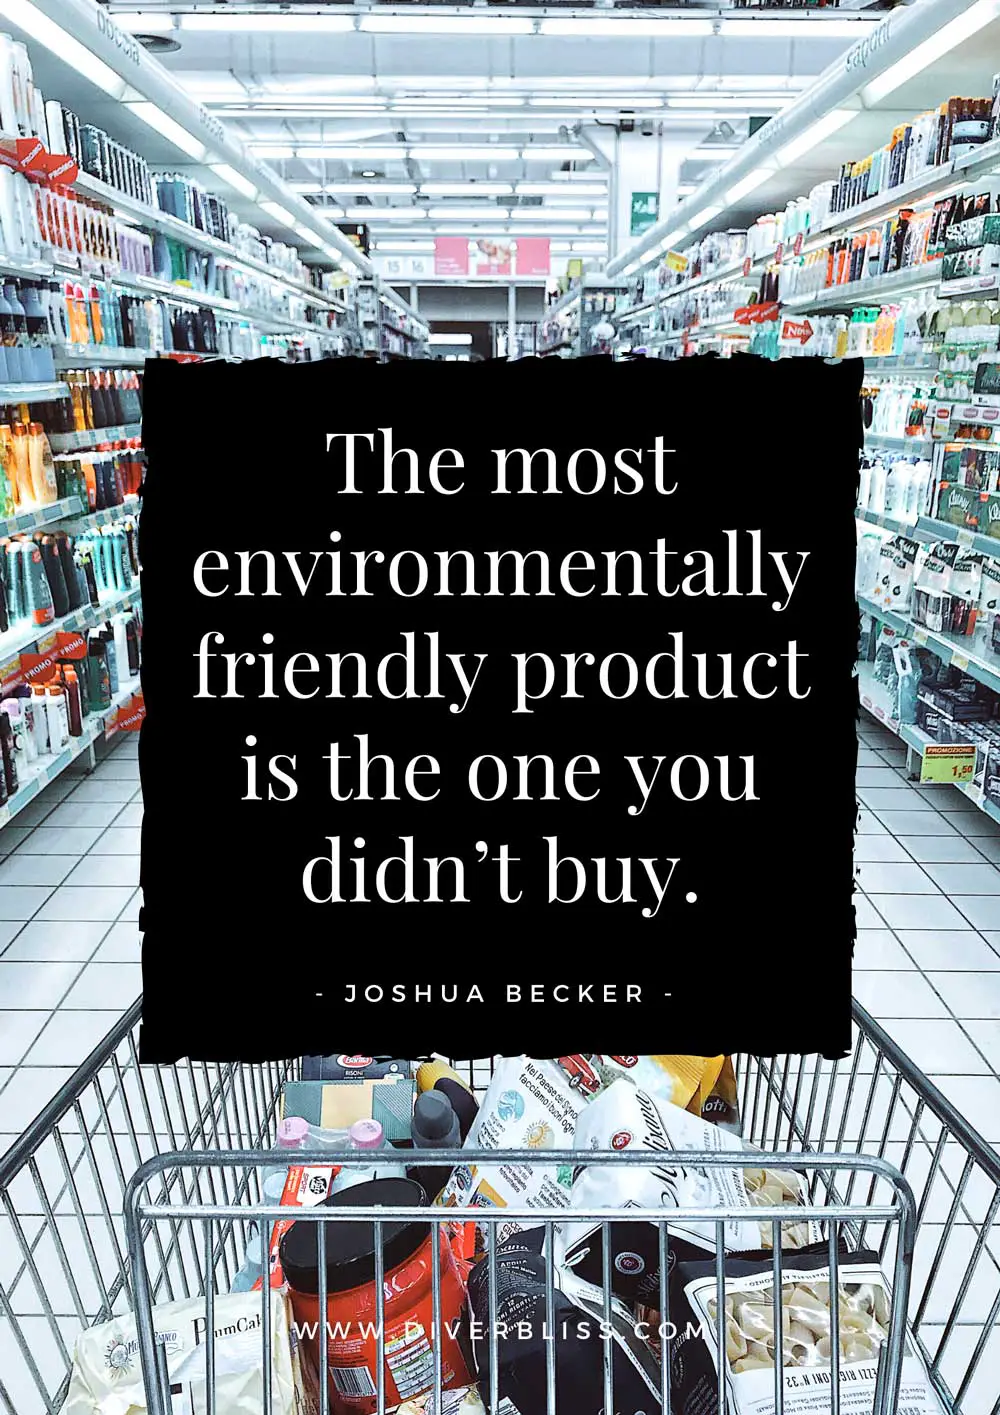 Say no to plastic quotes poster: “The most environmentally friendly product is the one you didn’t buy.”– Joshua Becker,